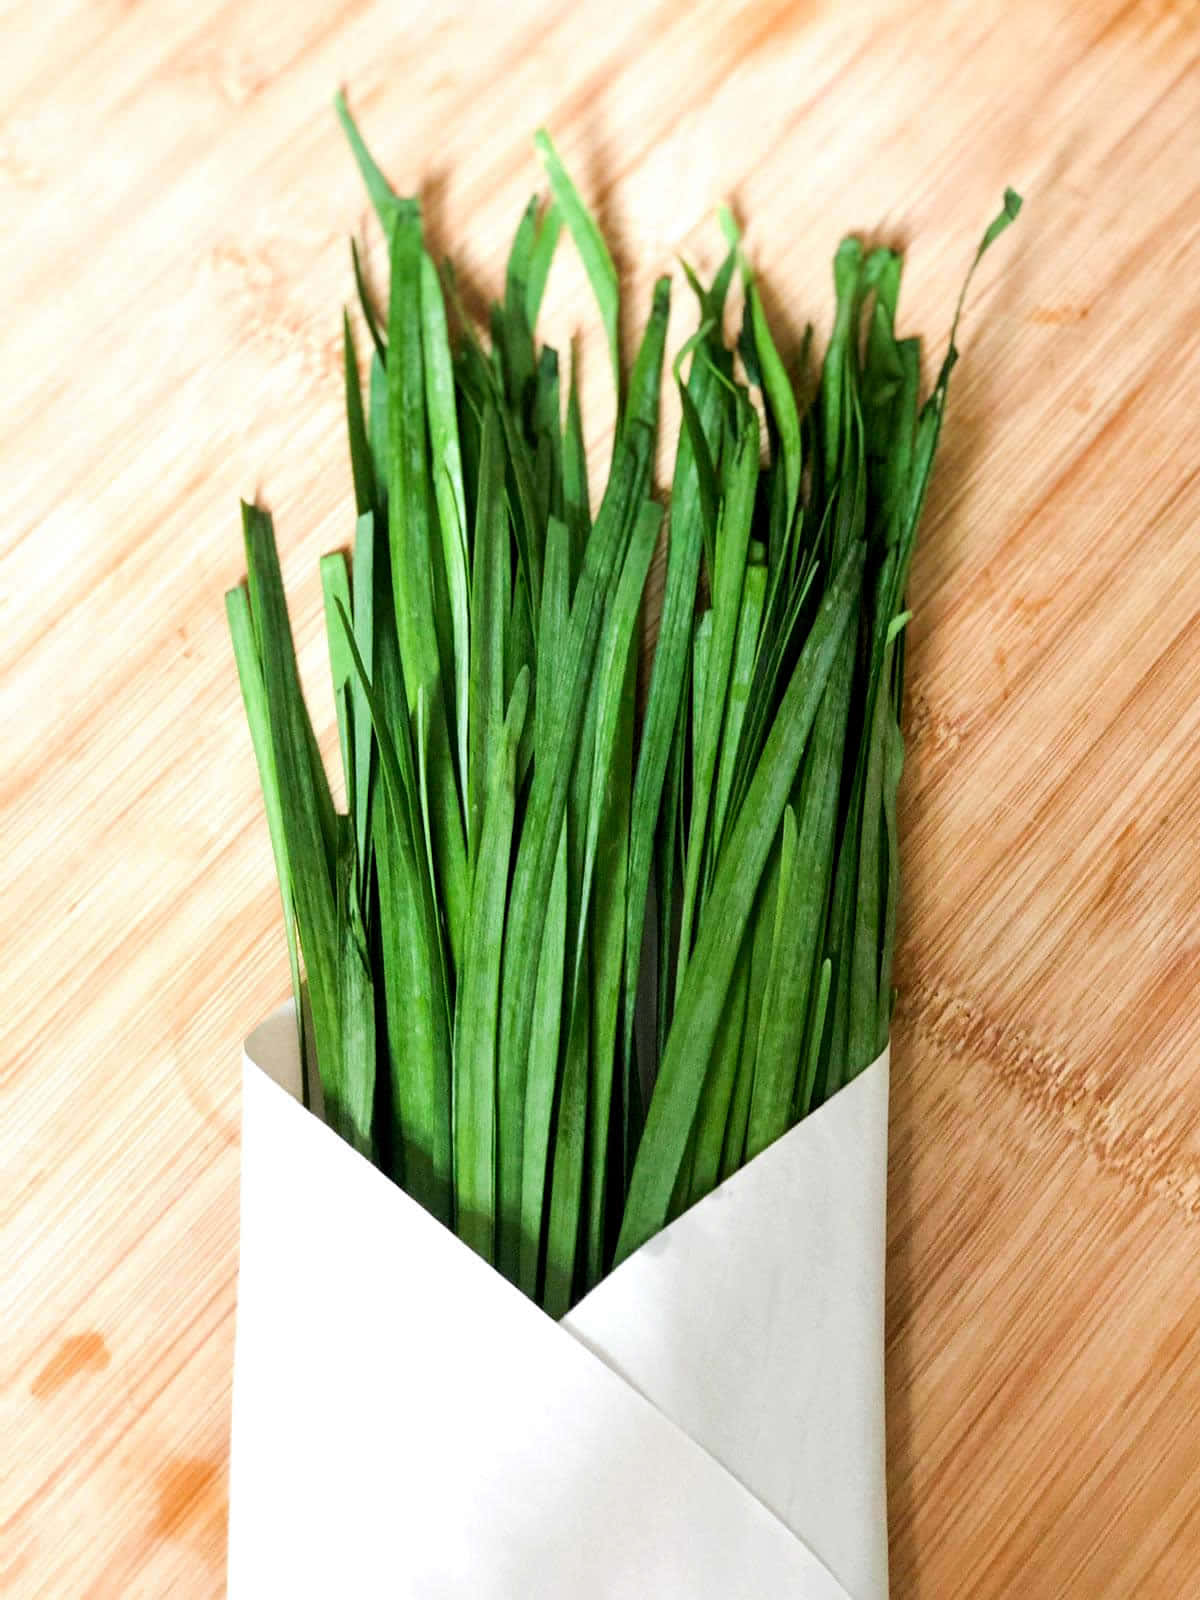 Freshly harvested green chives wrapped in white paper Wallpaper